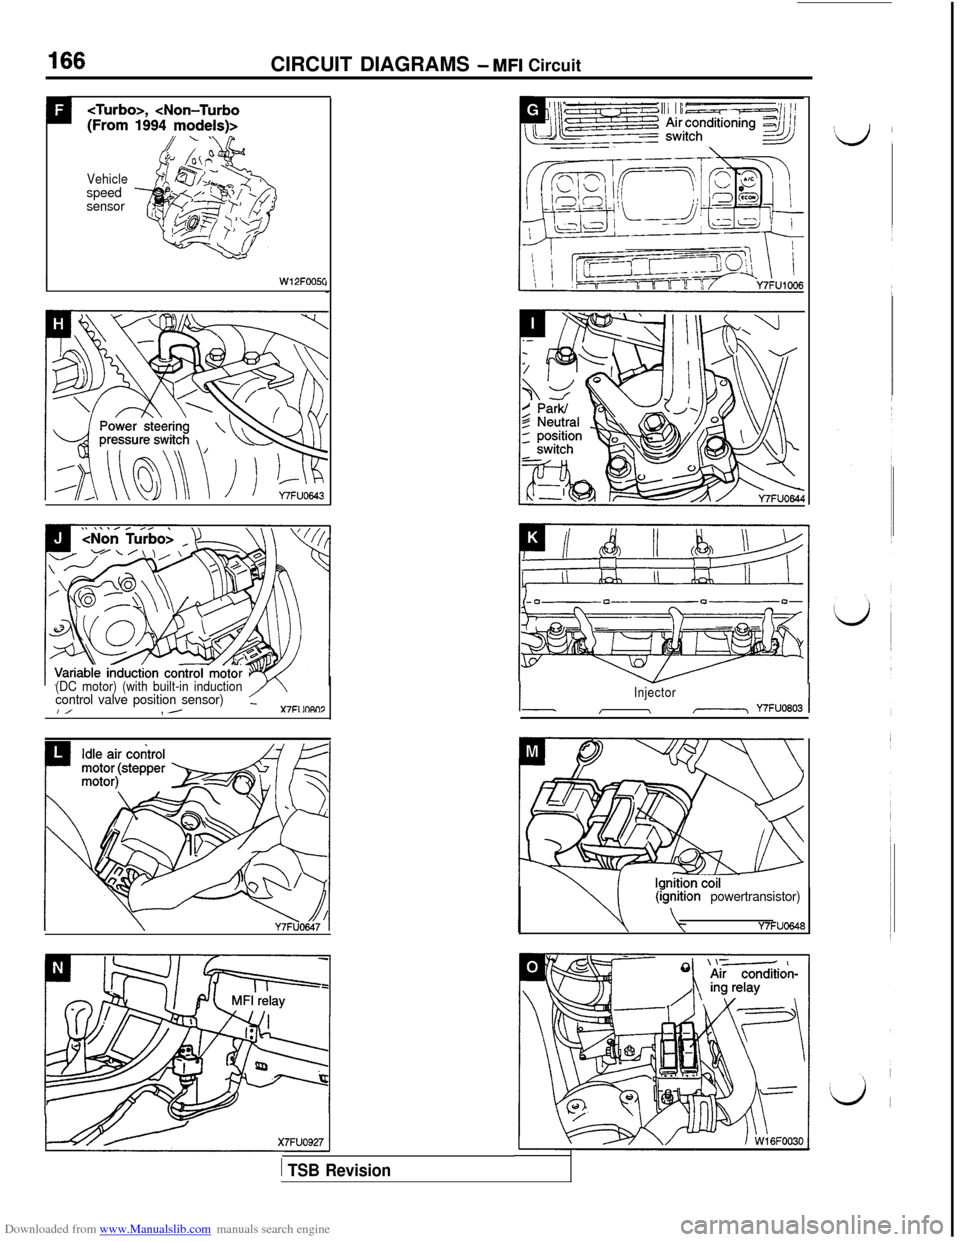 MITSUBISHI 3000GT 1996 2.G Workshop Manual Downloaded from www.Manualslib.com manuals search engine CIRCUIT DIAGRAMS - MFI Circuit
<Turbo>, <Non-Turbo(From 1994 models)>
Vehiclespeed
sensor
IW12FOOSC
(DC motor) (with built-in inductioncontrol 